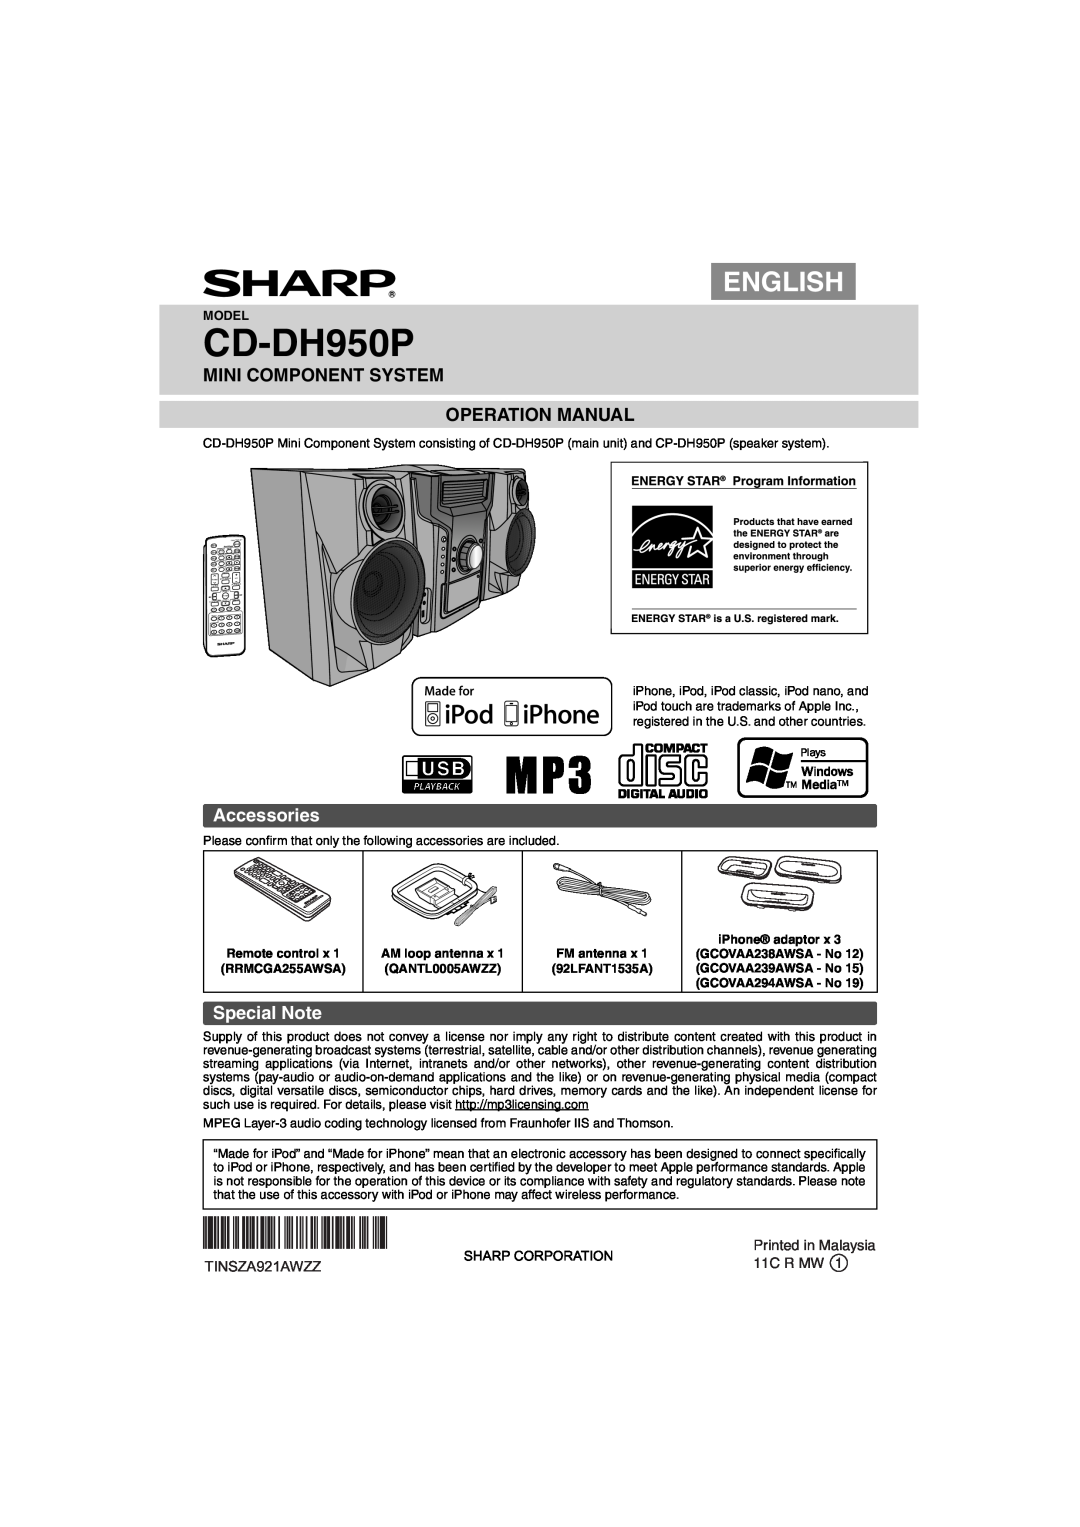 Sharp CD-DH950P operation manual Accessories, Special Note, 11C R MW, English, TINSZA921AWZZ 